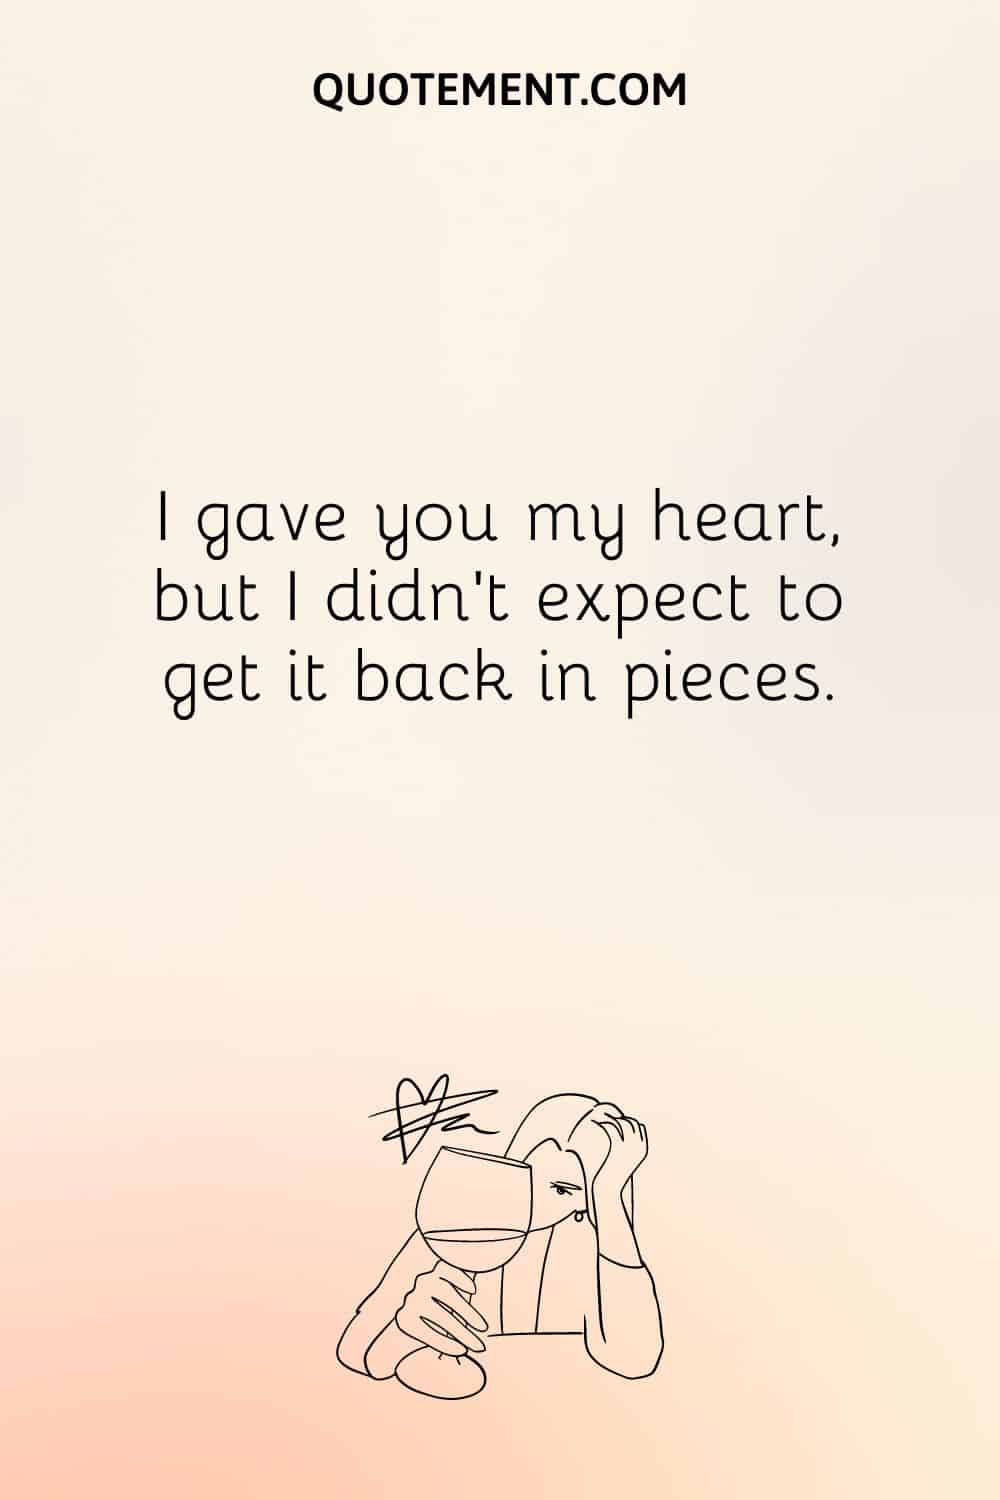  I gave you my heart, but I didn’t expect to get it back in pieces.
